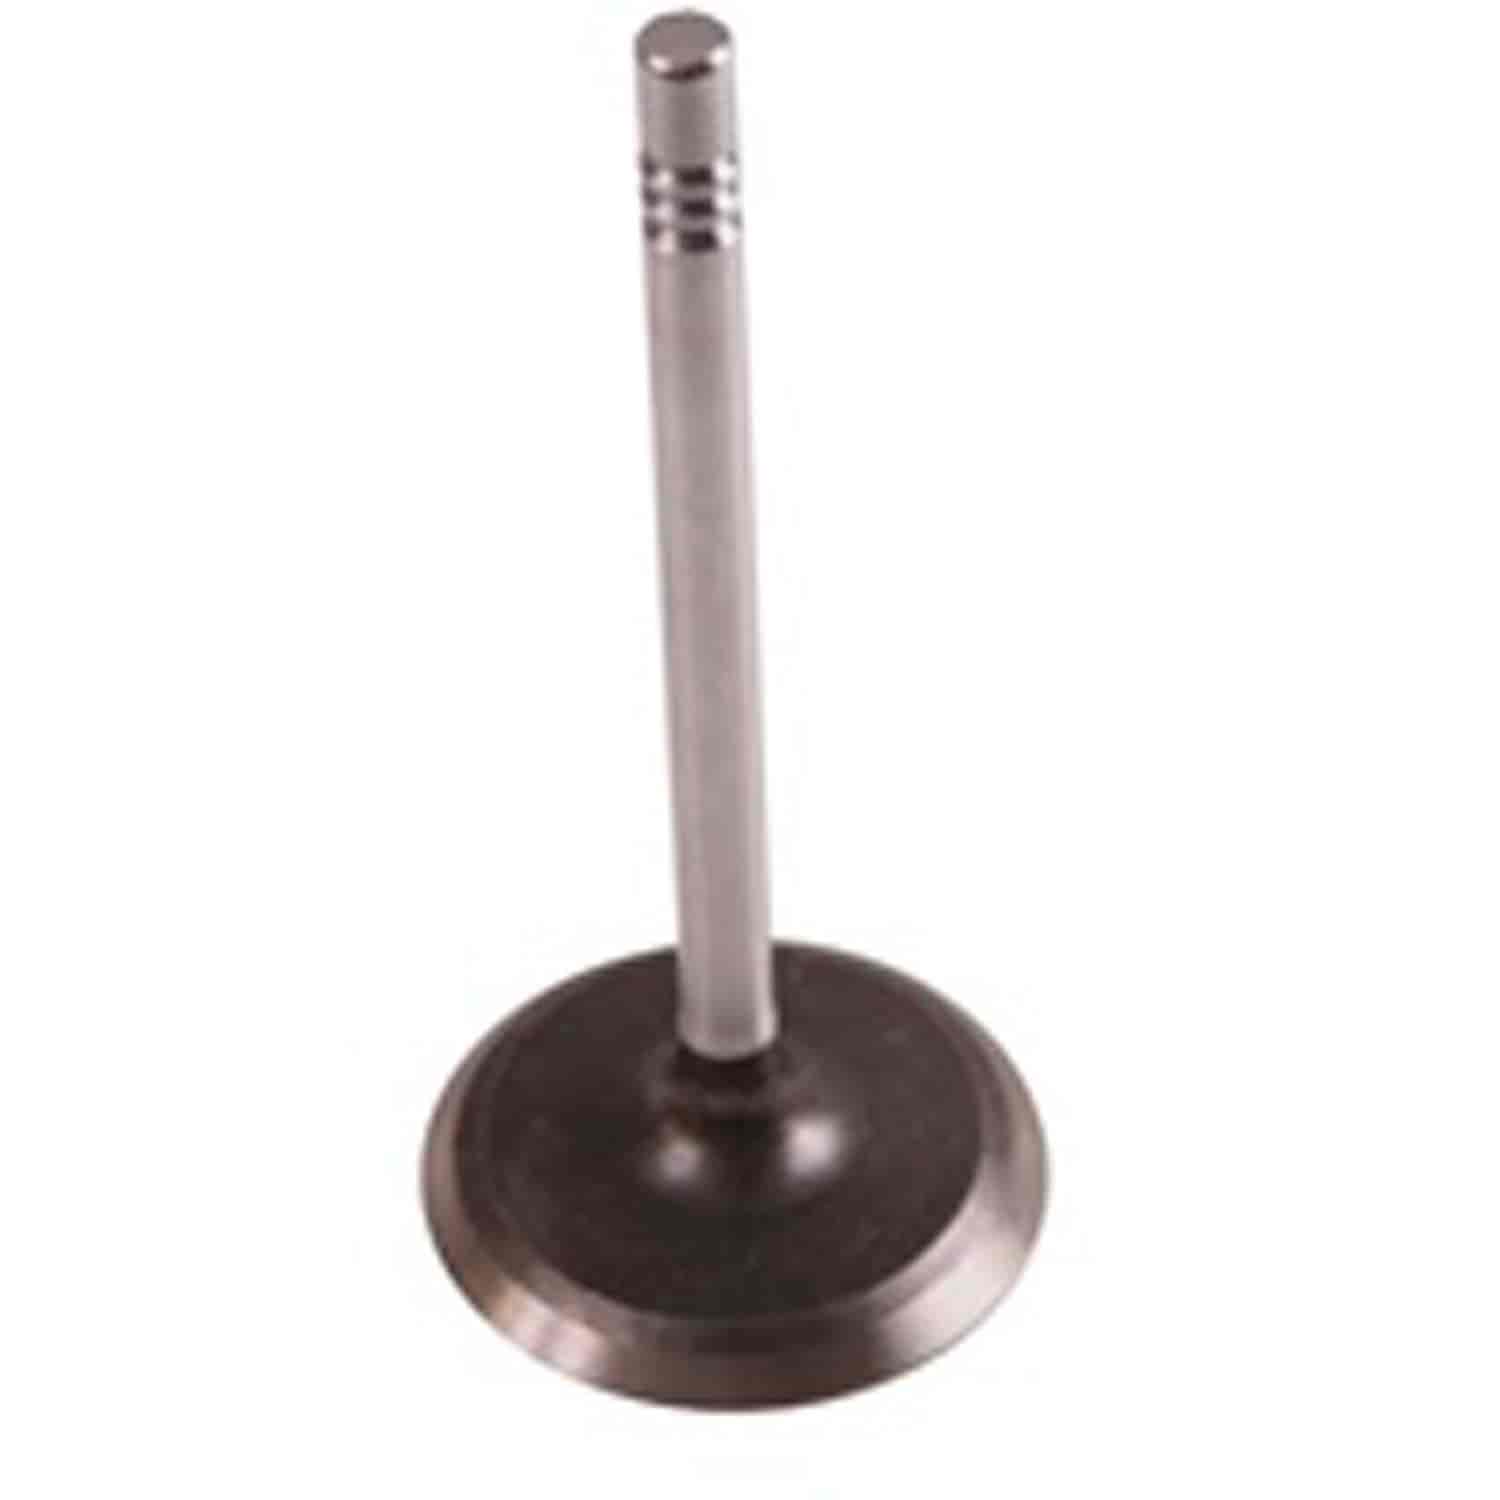 Exhaust Valve 3.8L 4.2L and 5.0L .003 inch Over 1972-1980 Models